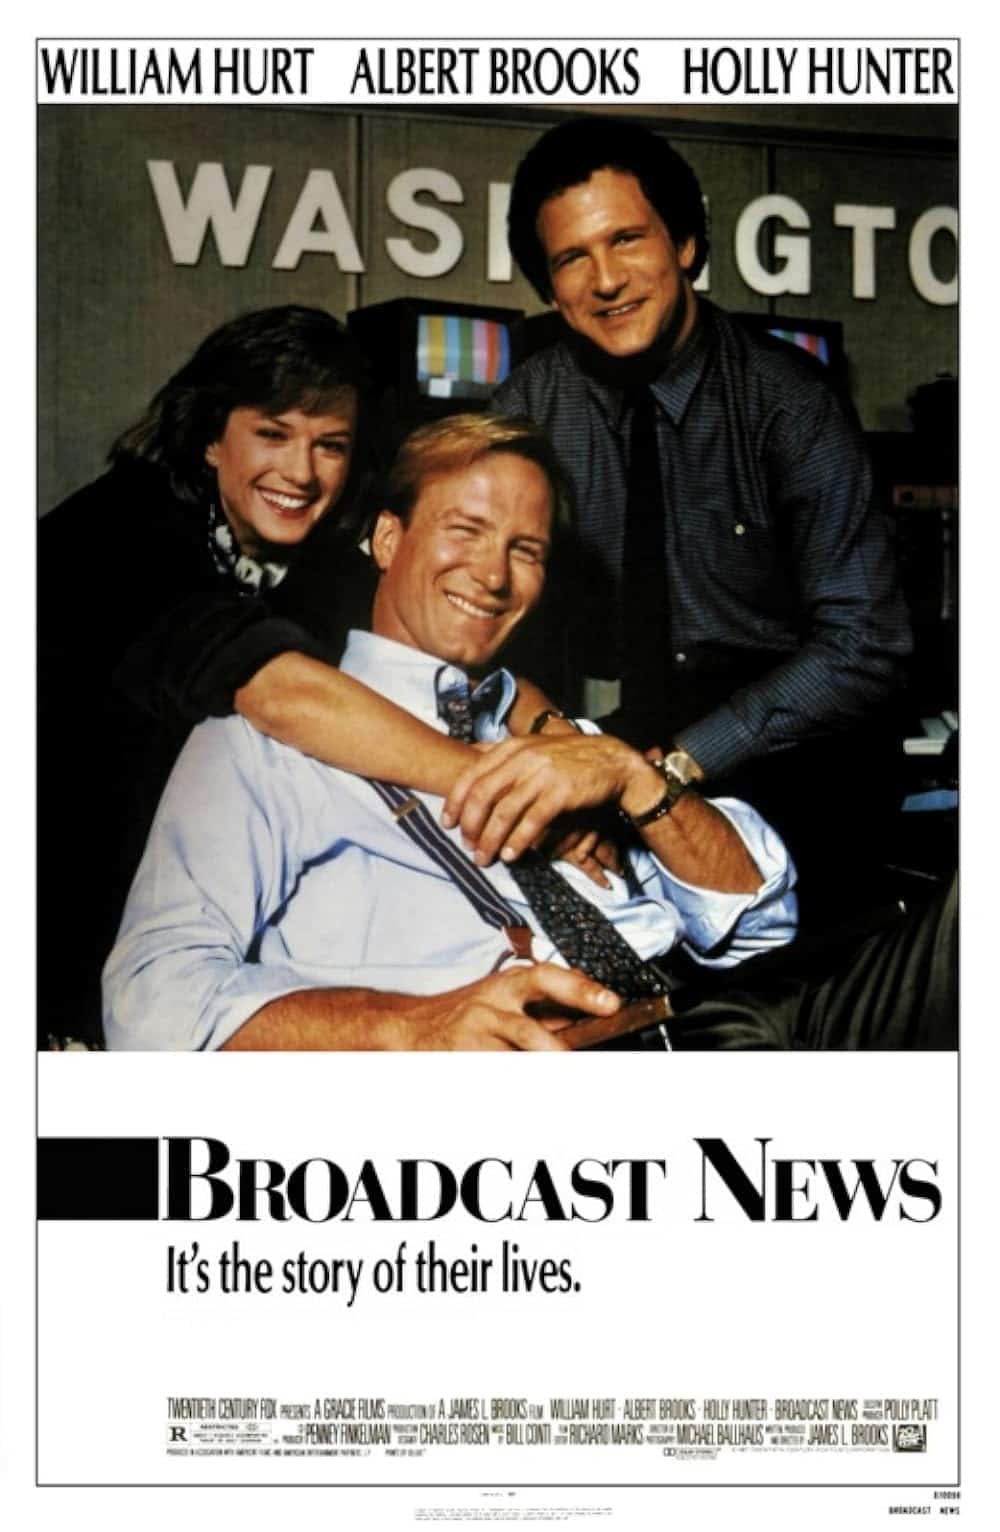 Movies You Gotta See: ‘Broadcast News’ explores journalistic ethics with humor and heart